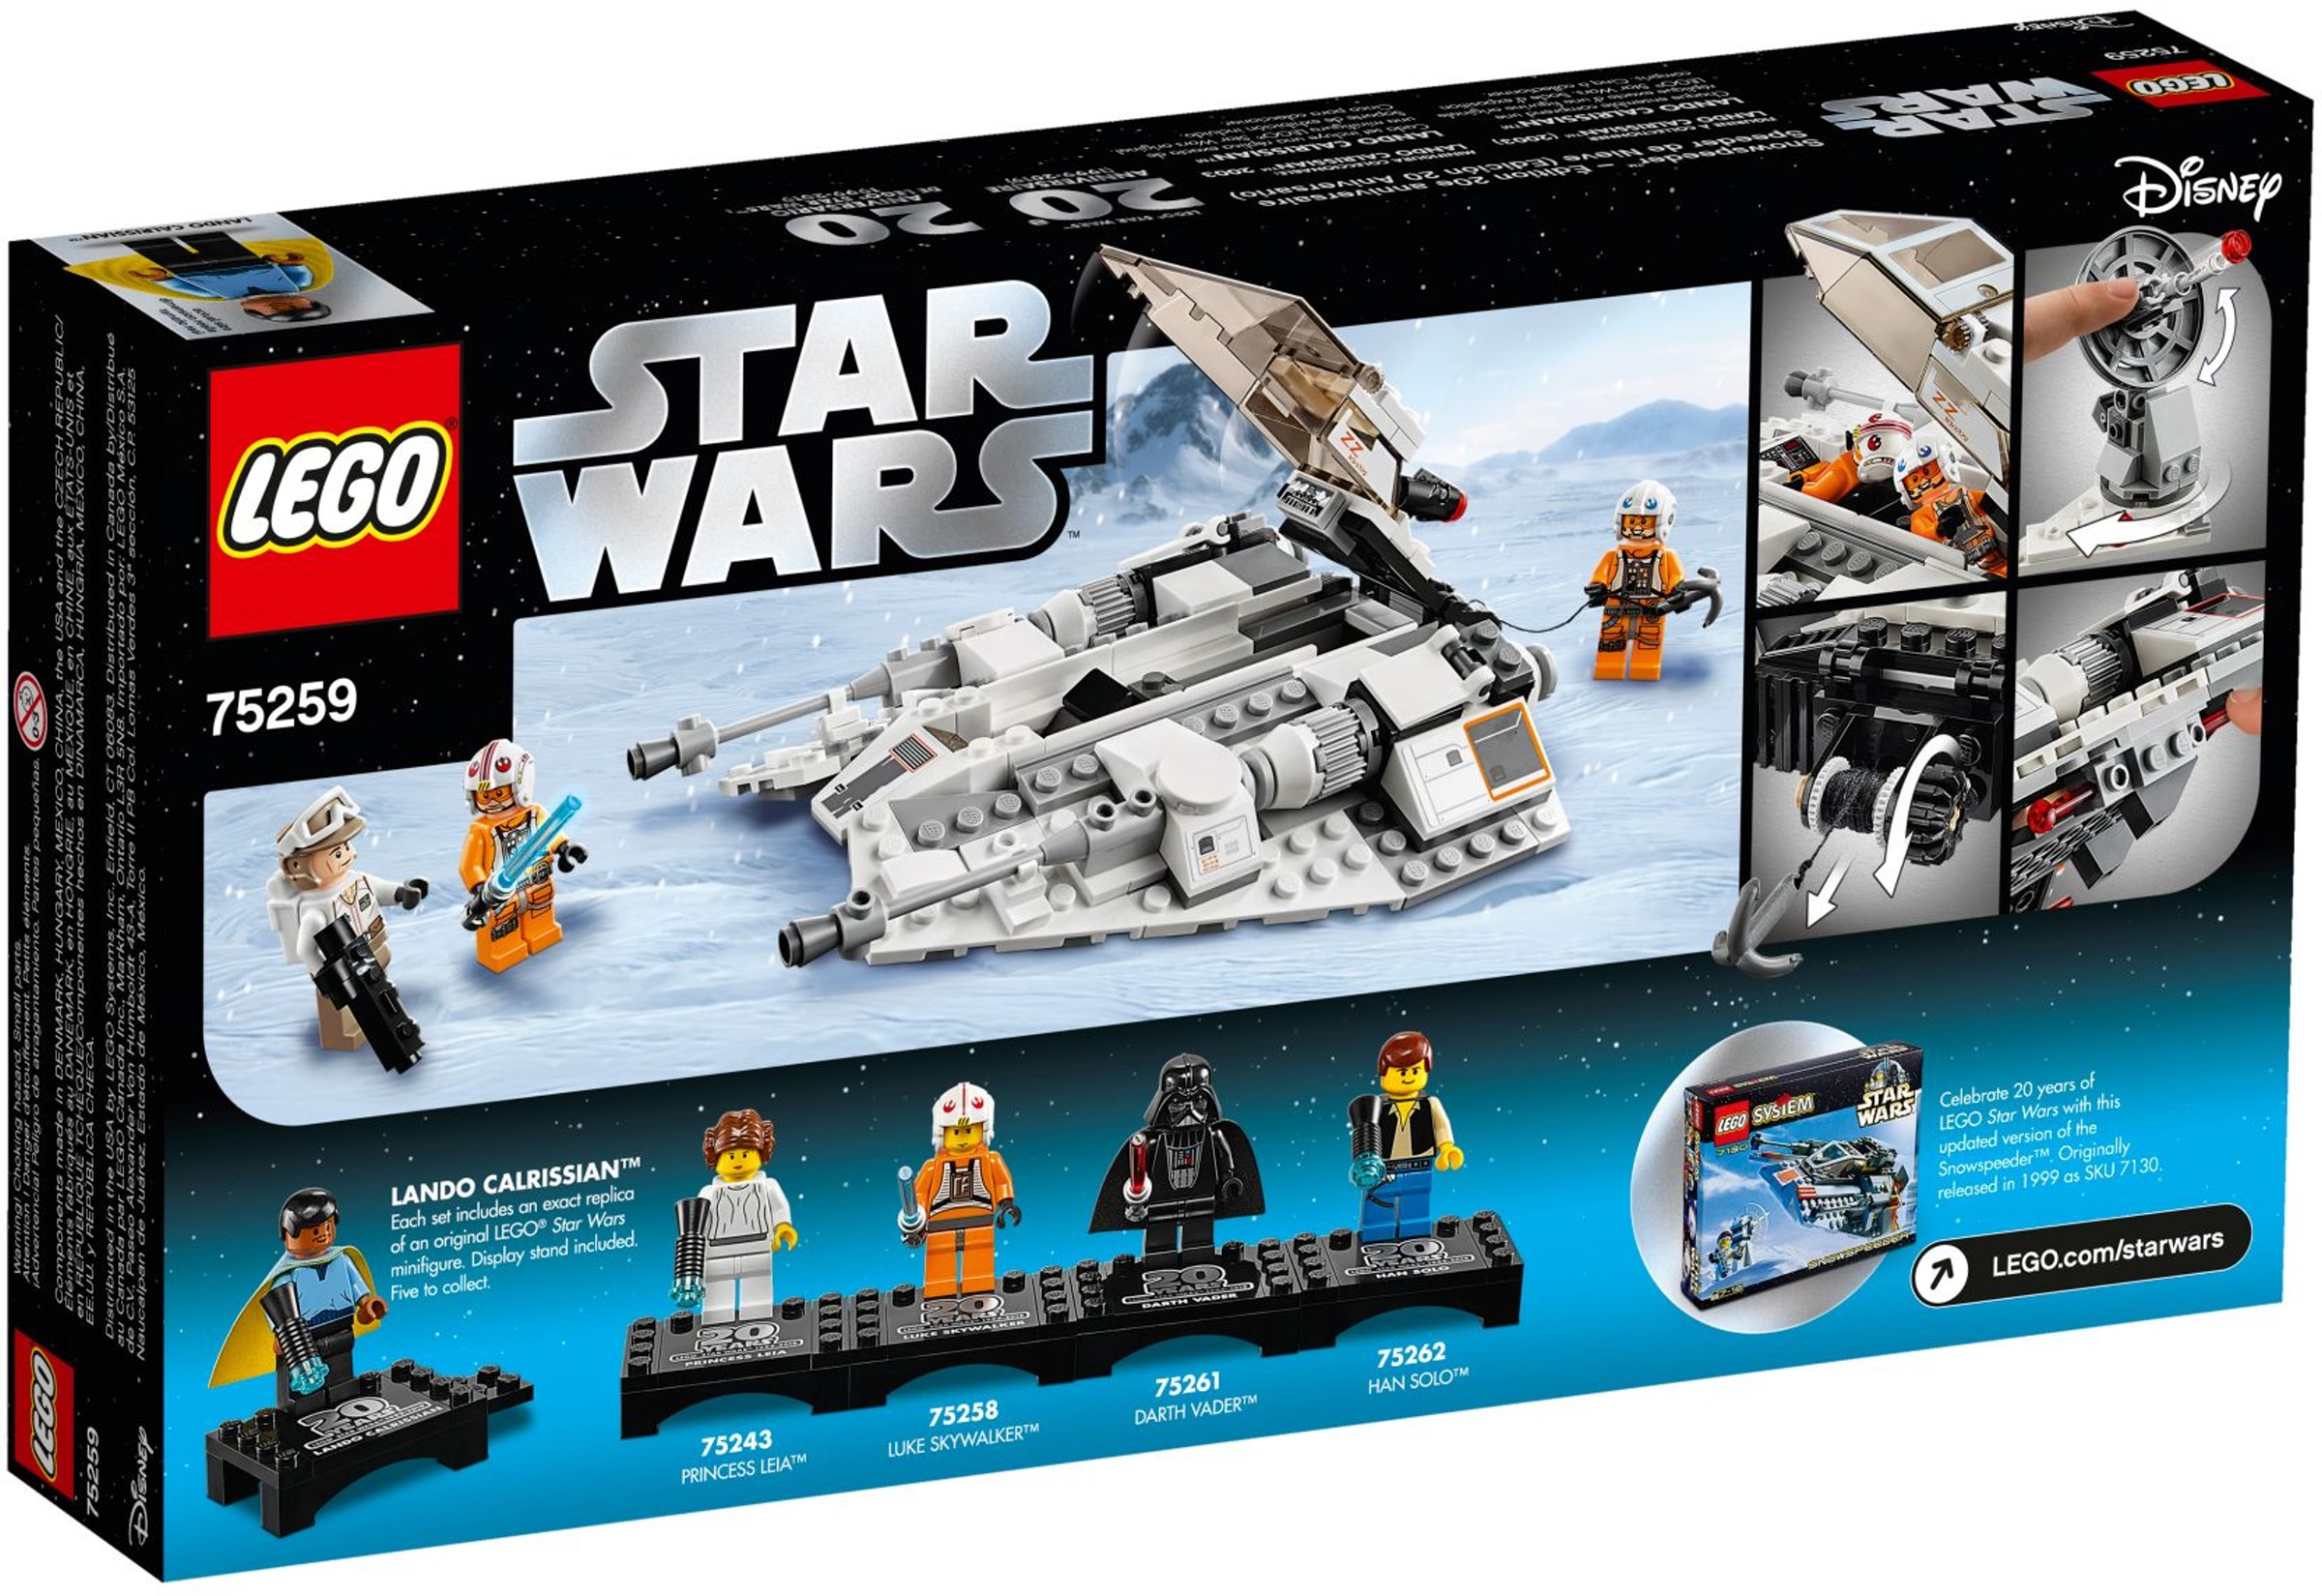 sw1025 with Blaster LEGO Star Wars™ Dak Ralter Minifigure from 75259 